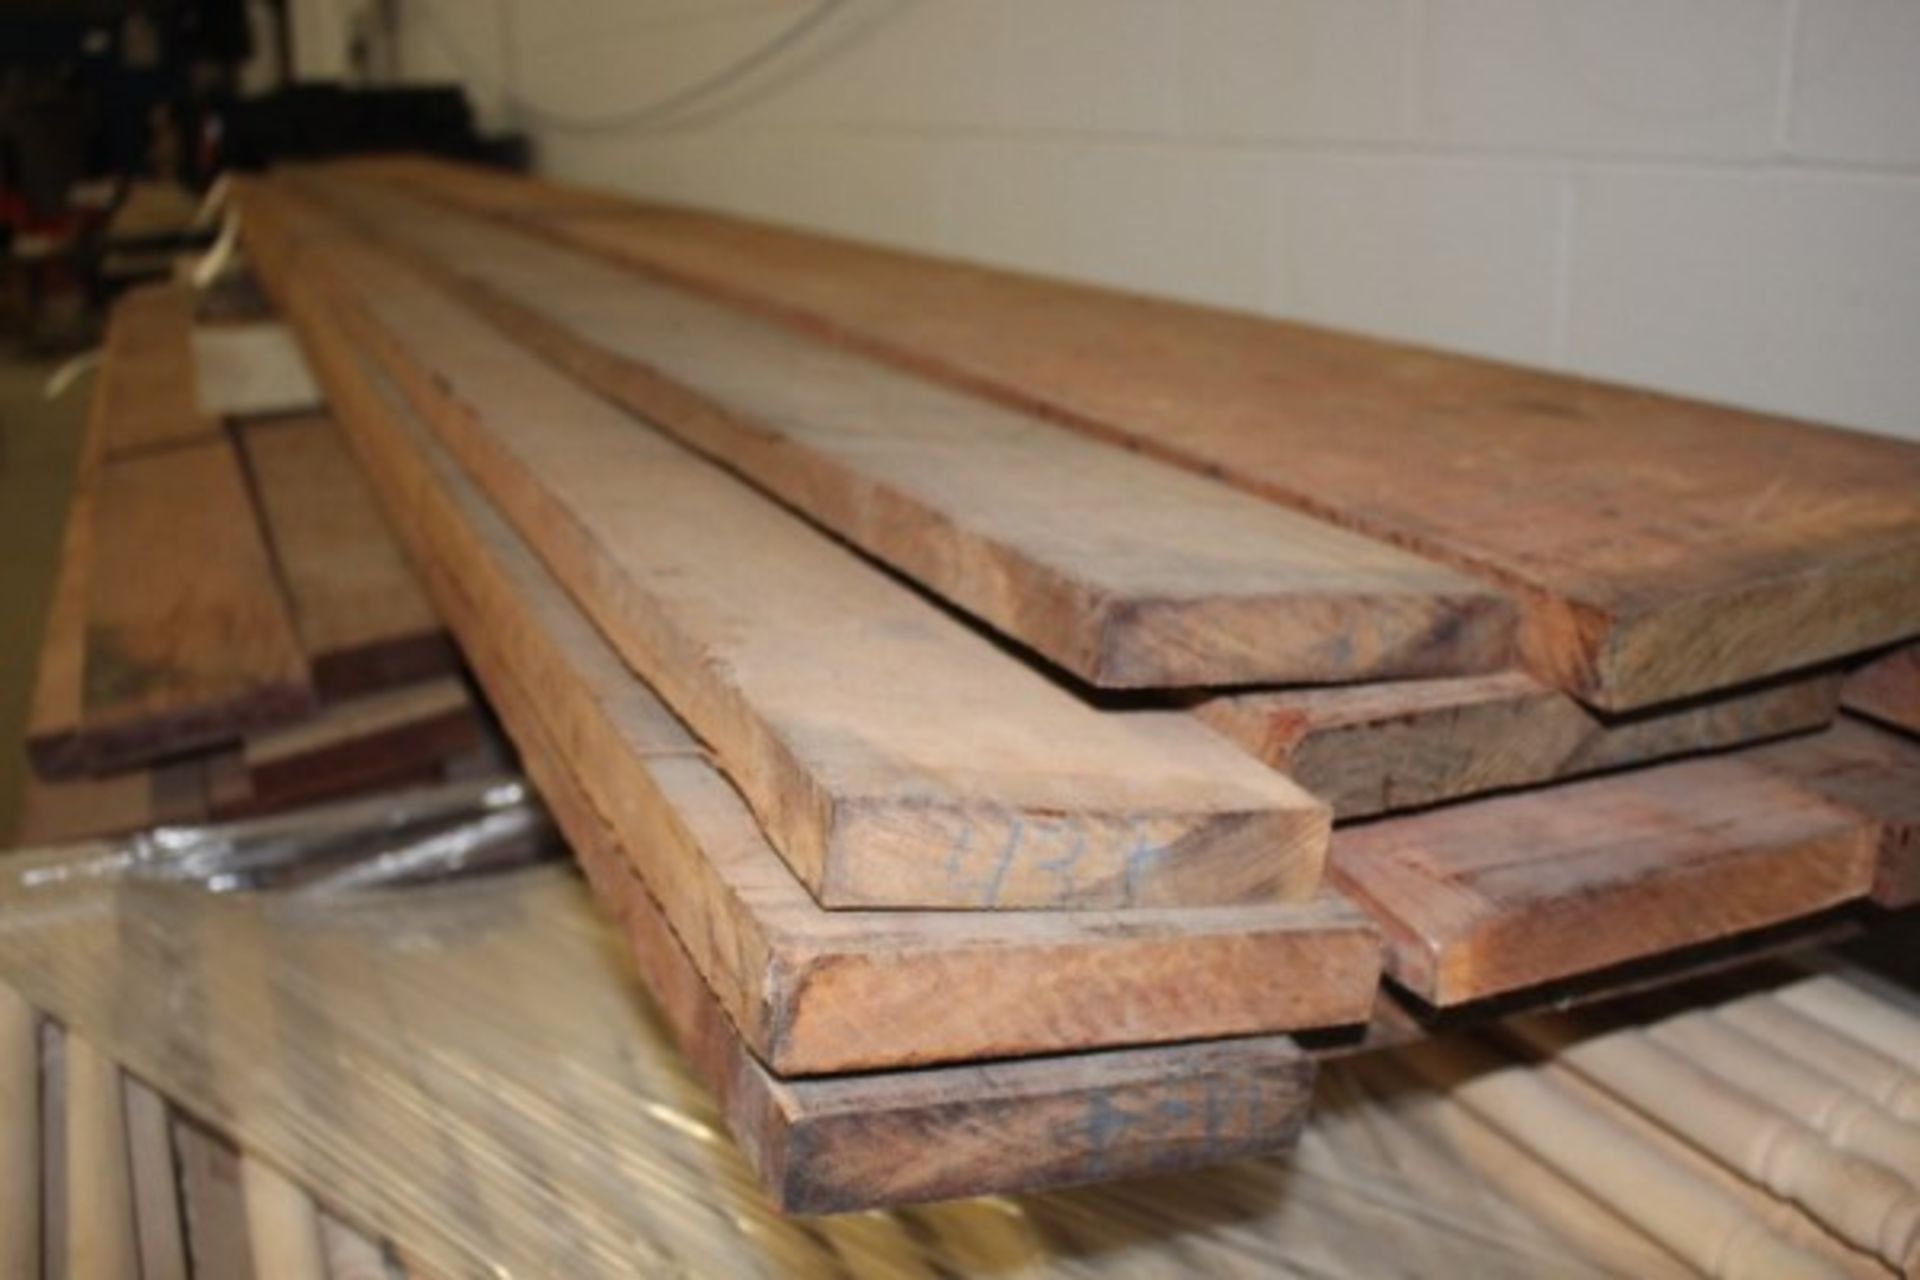 Pallet Lot of Bloodwood Rough Cut Lumber (95.52 approx board feet) - Image 3 of 3